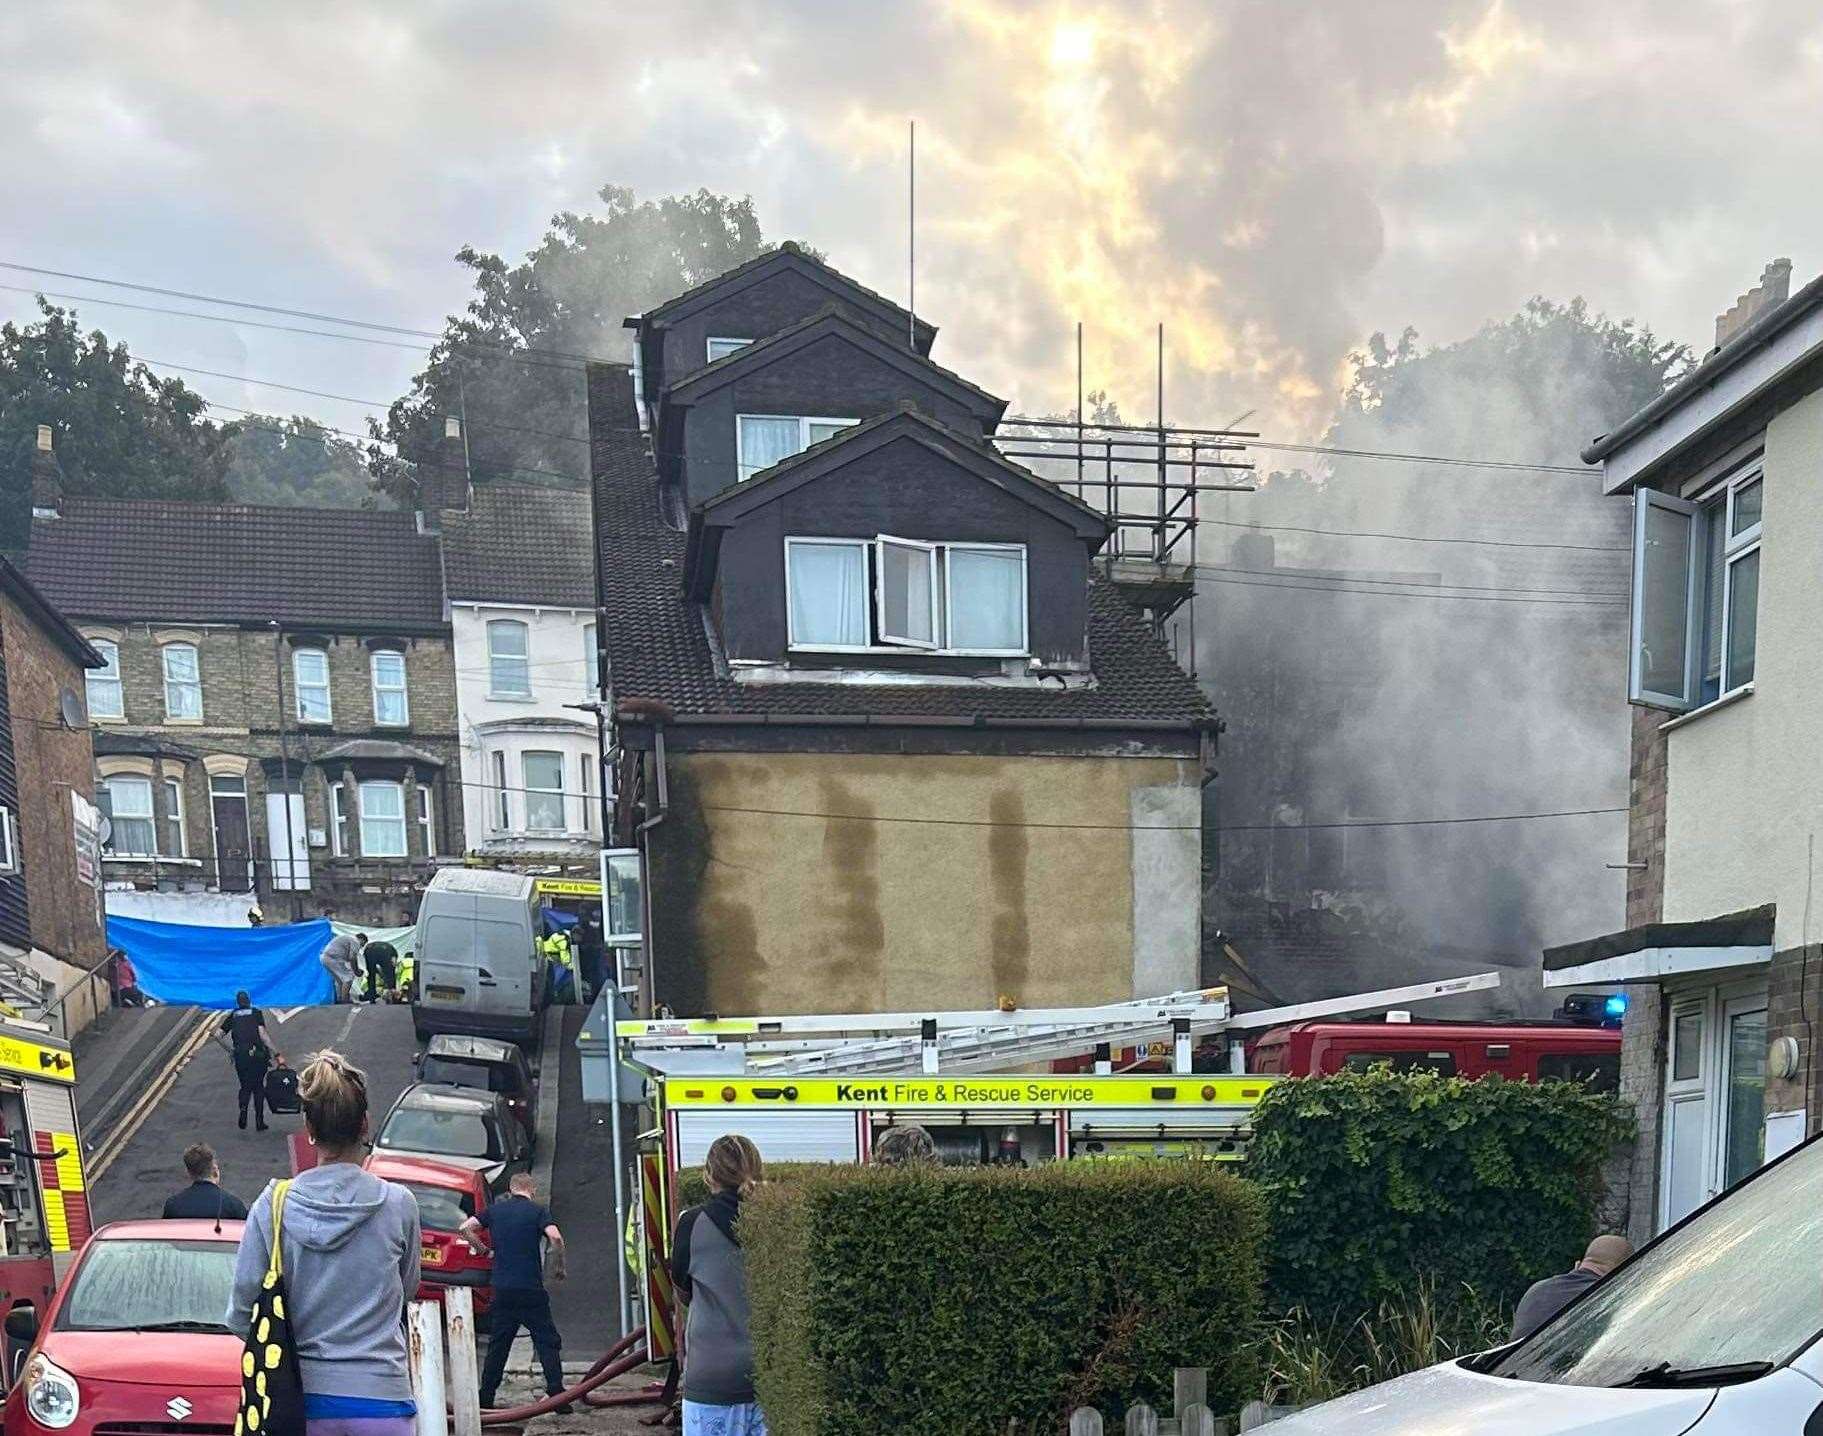 Five fire engines have been sent to the scene. Picture: Angela Louise Fox